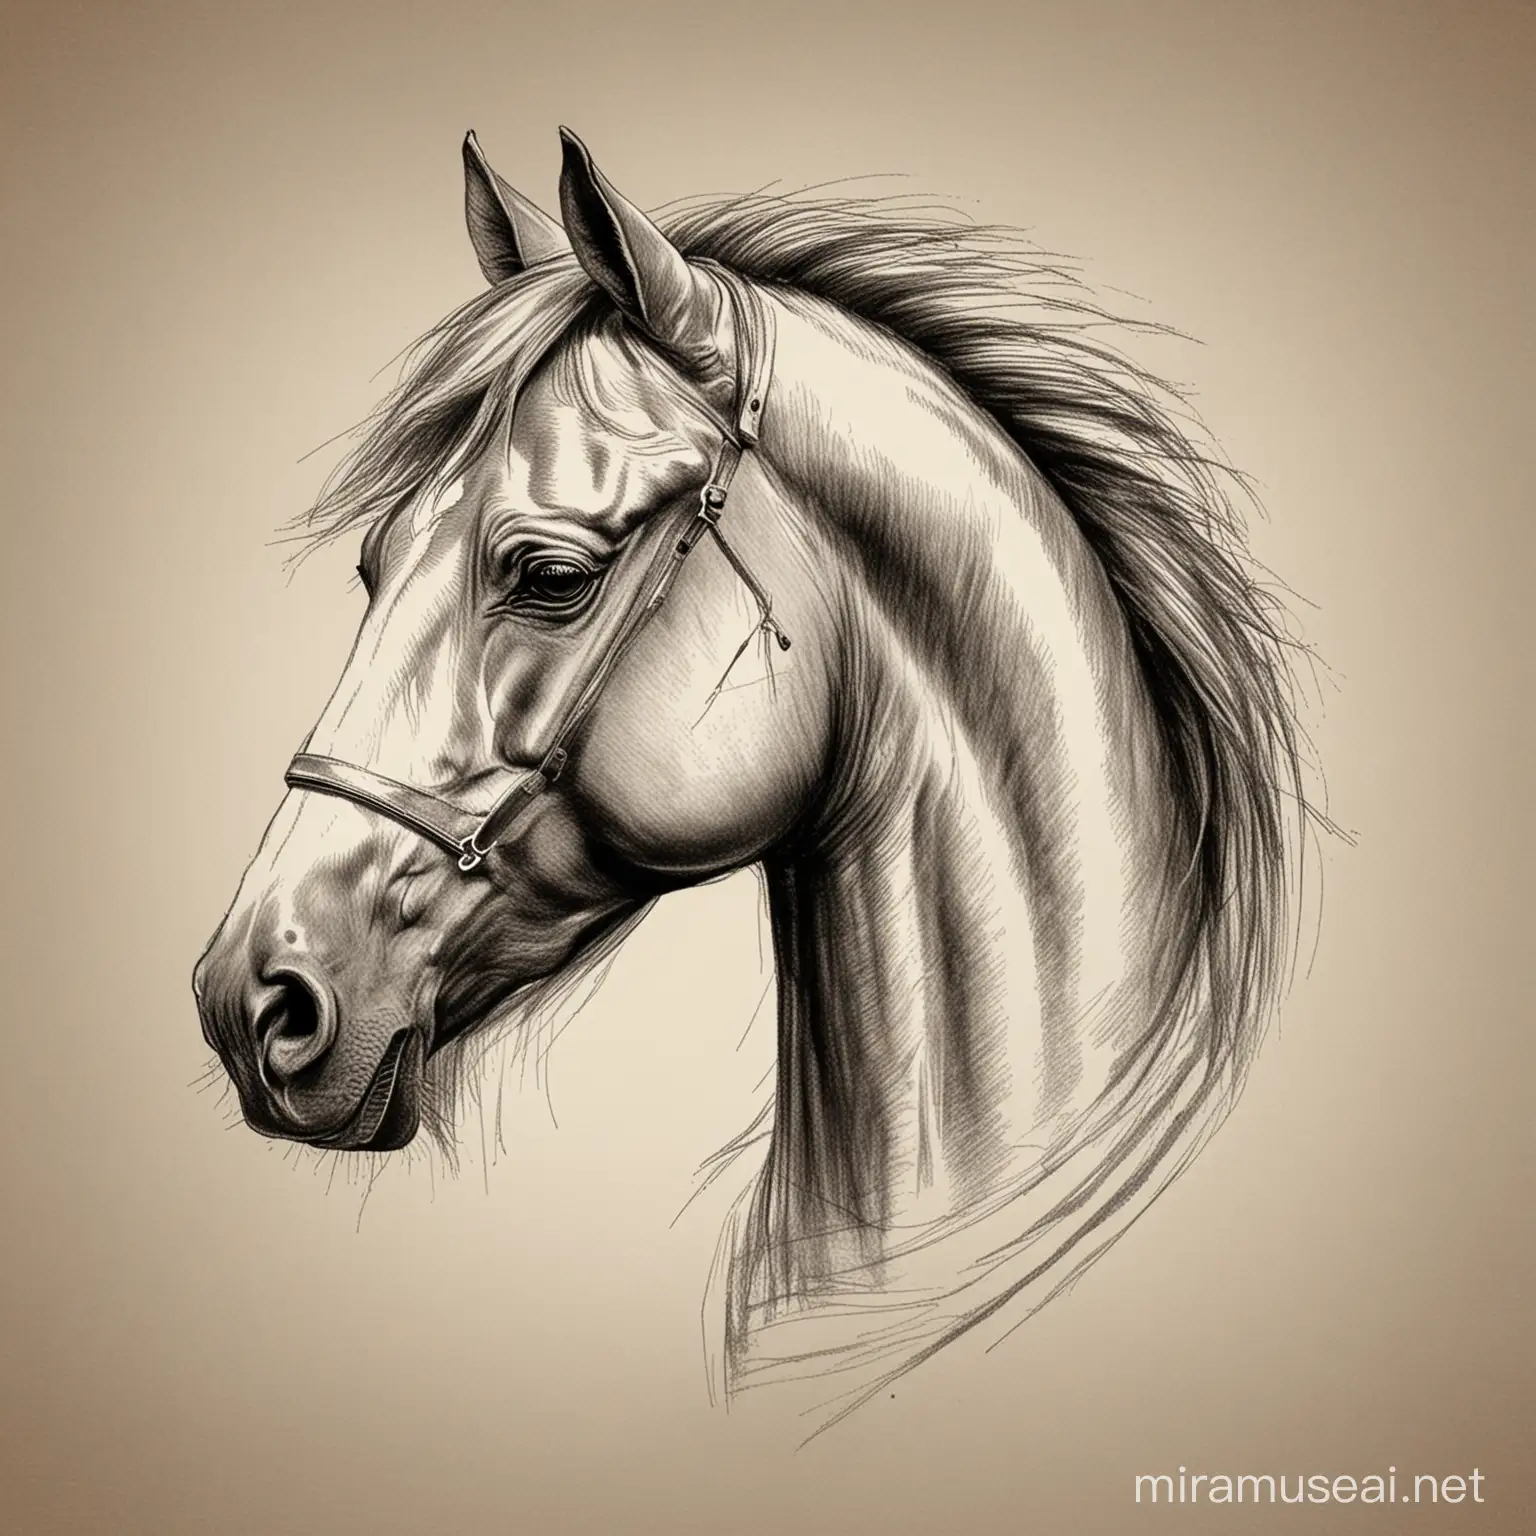 a sketch of a horse head, the graphic should look like a logo